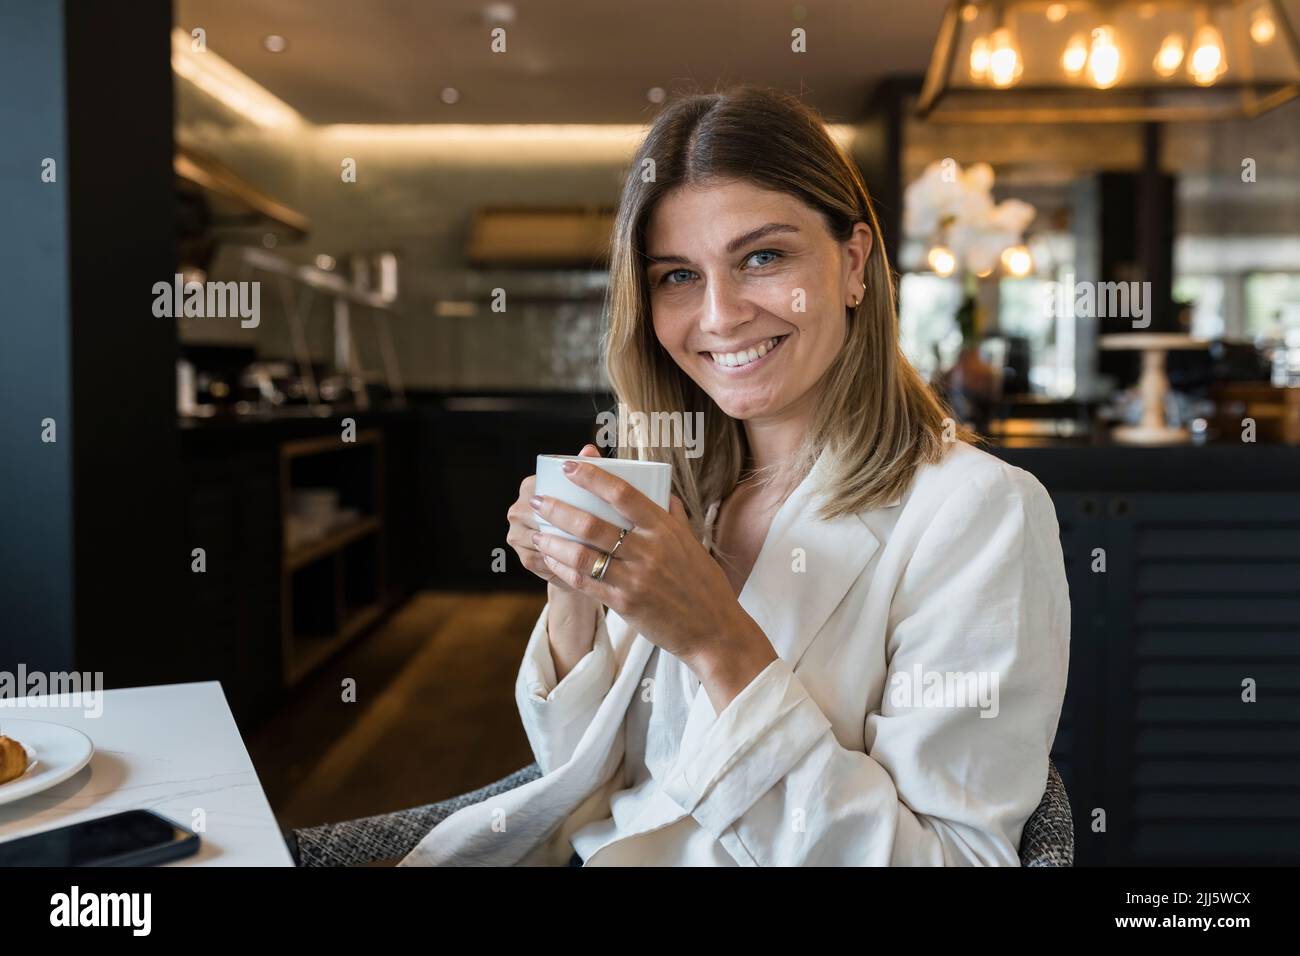 Smiling businesswoman holding coffee cup at restaurant Stock Photo